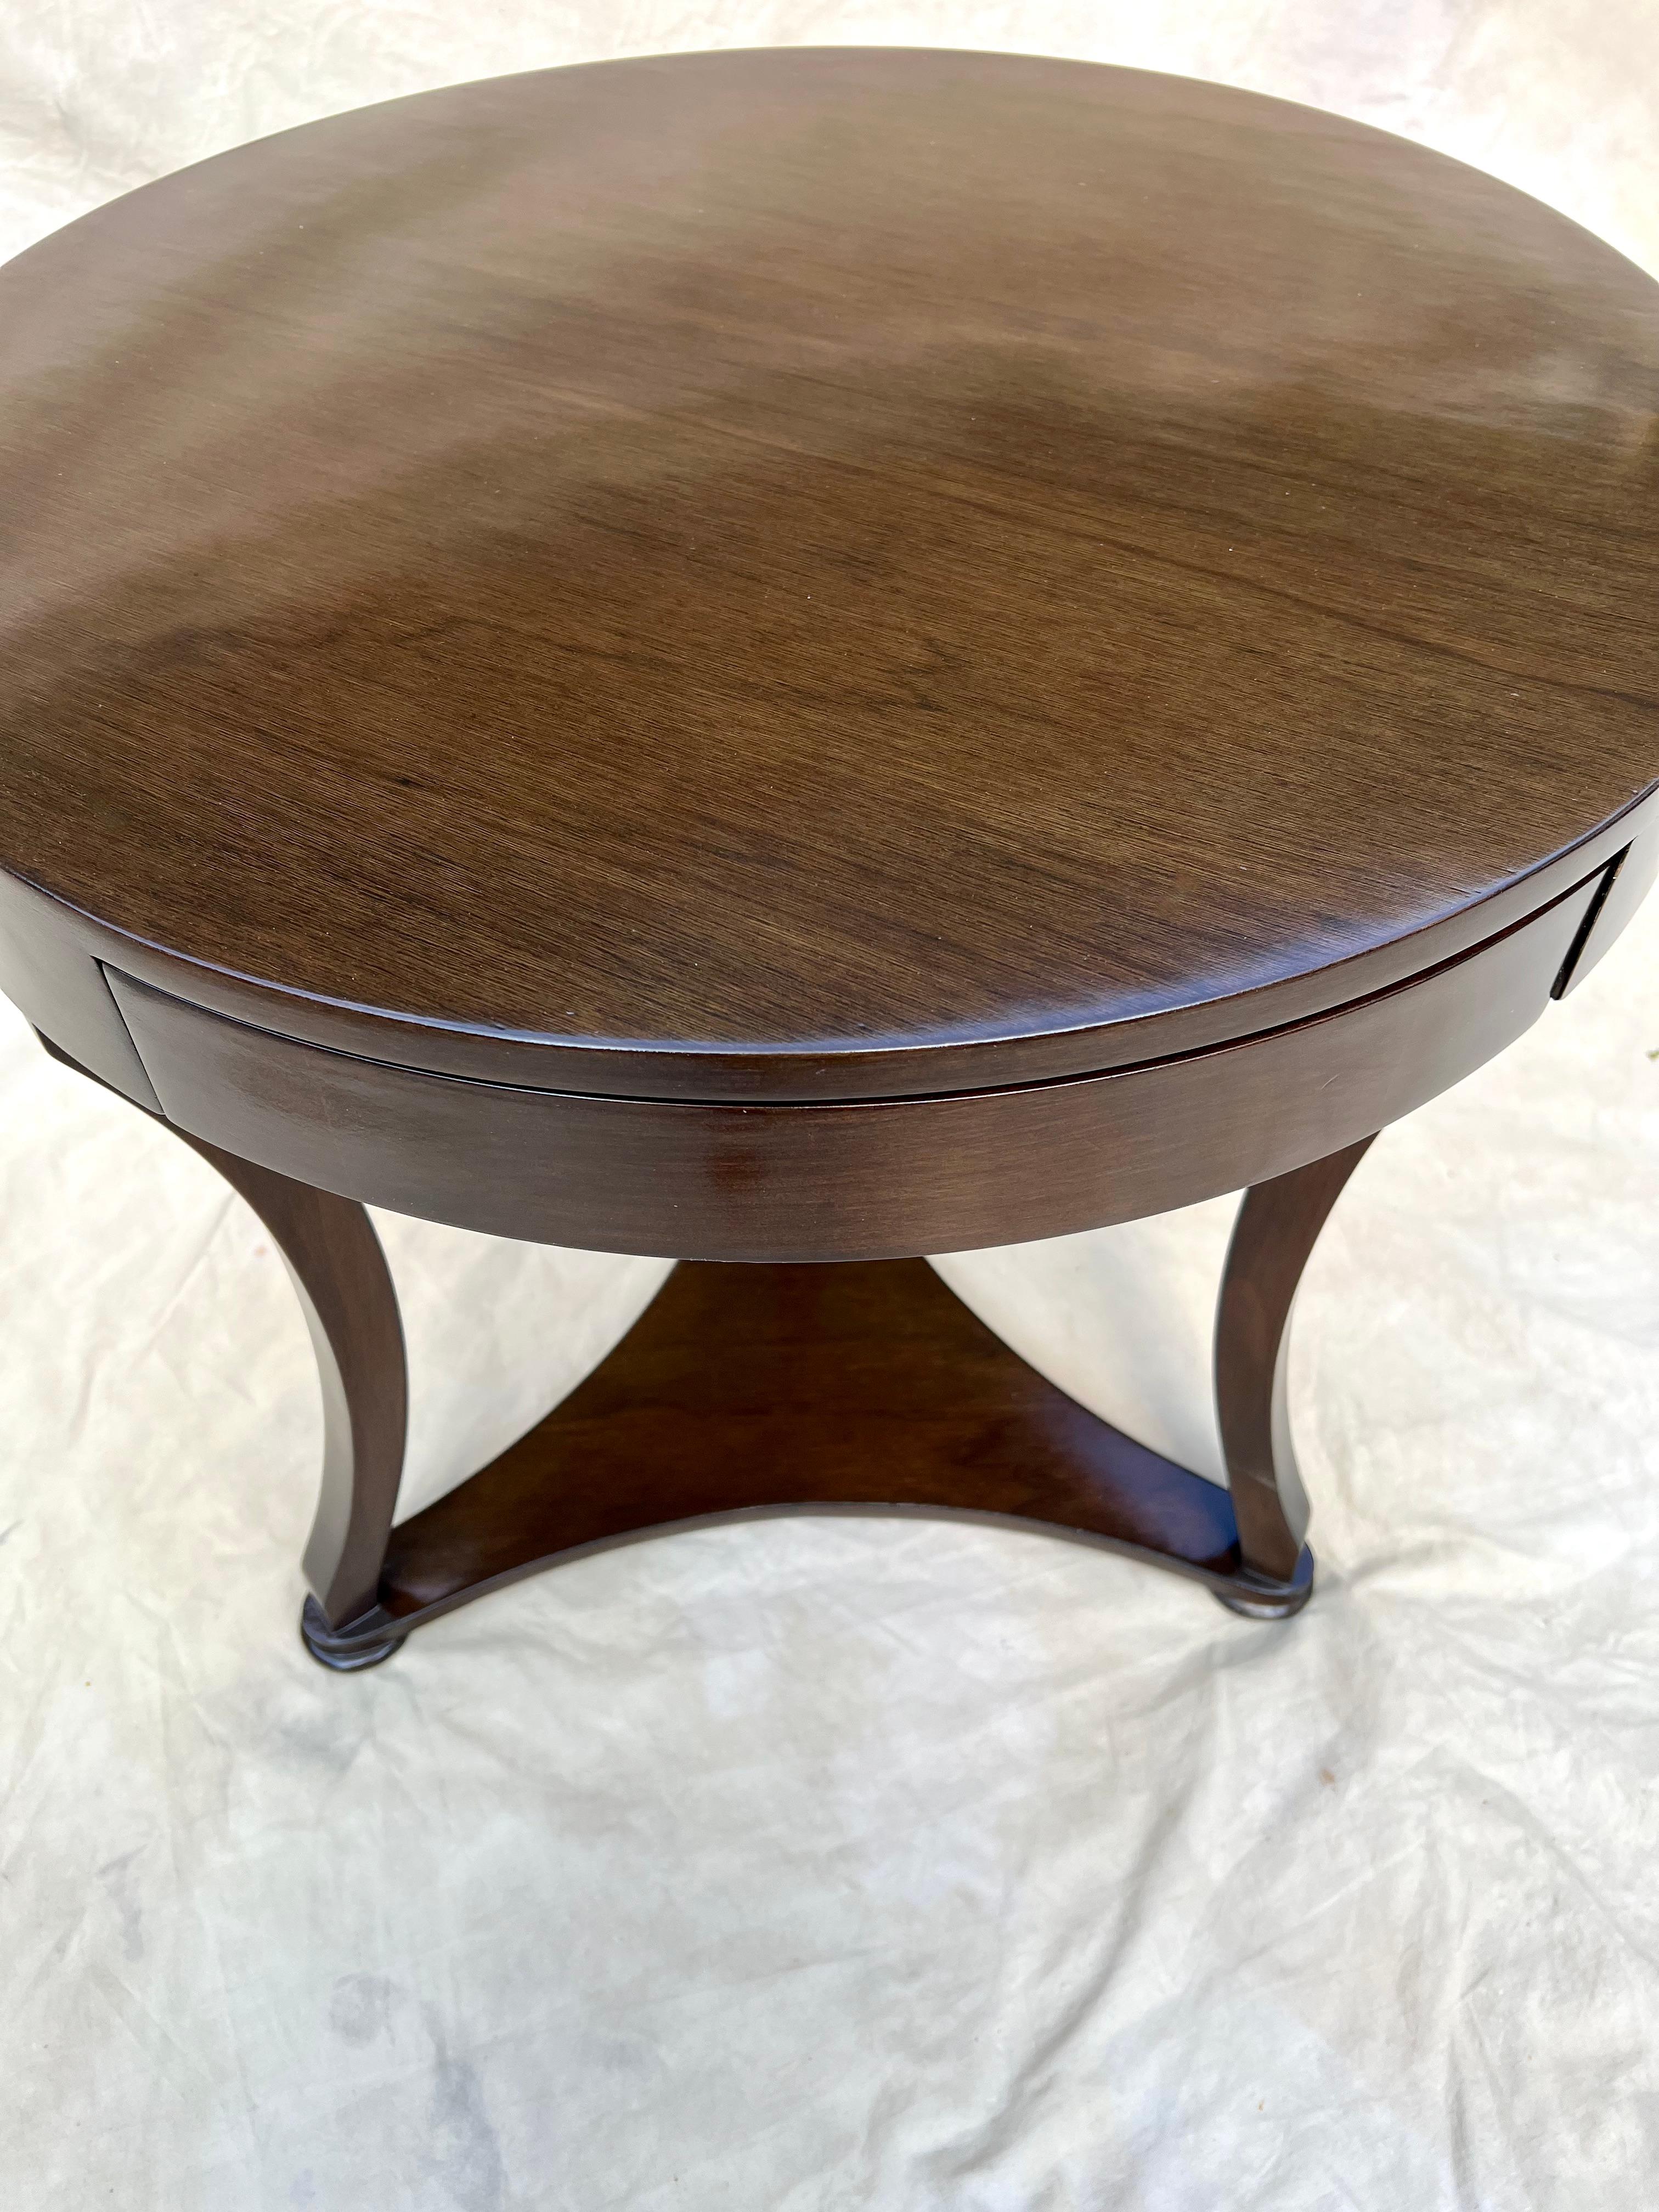 Wood Walnut Finish Round Side Table in Walnut Finish with Drawer